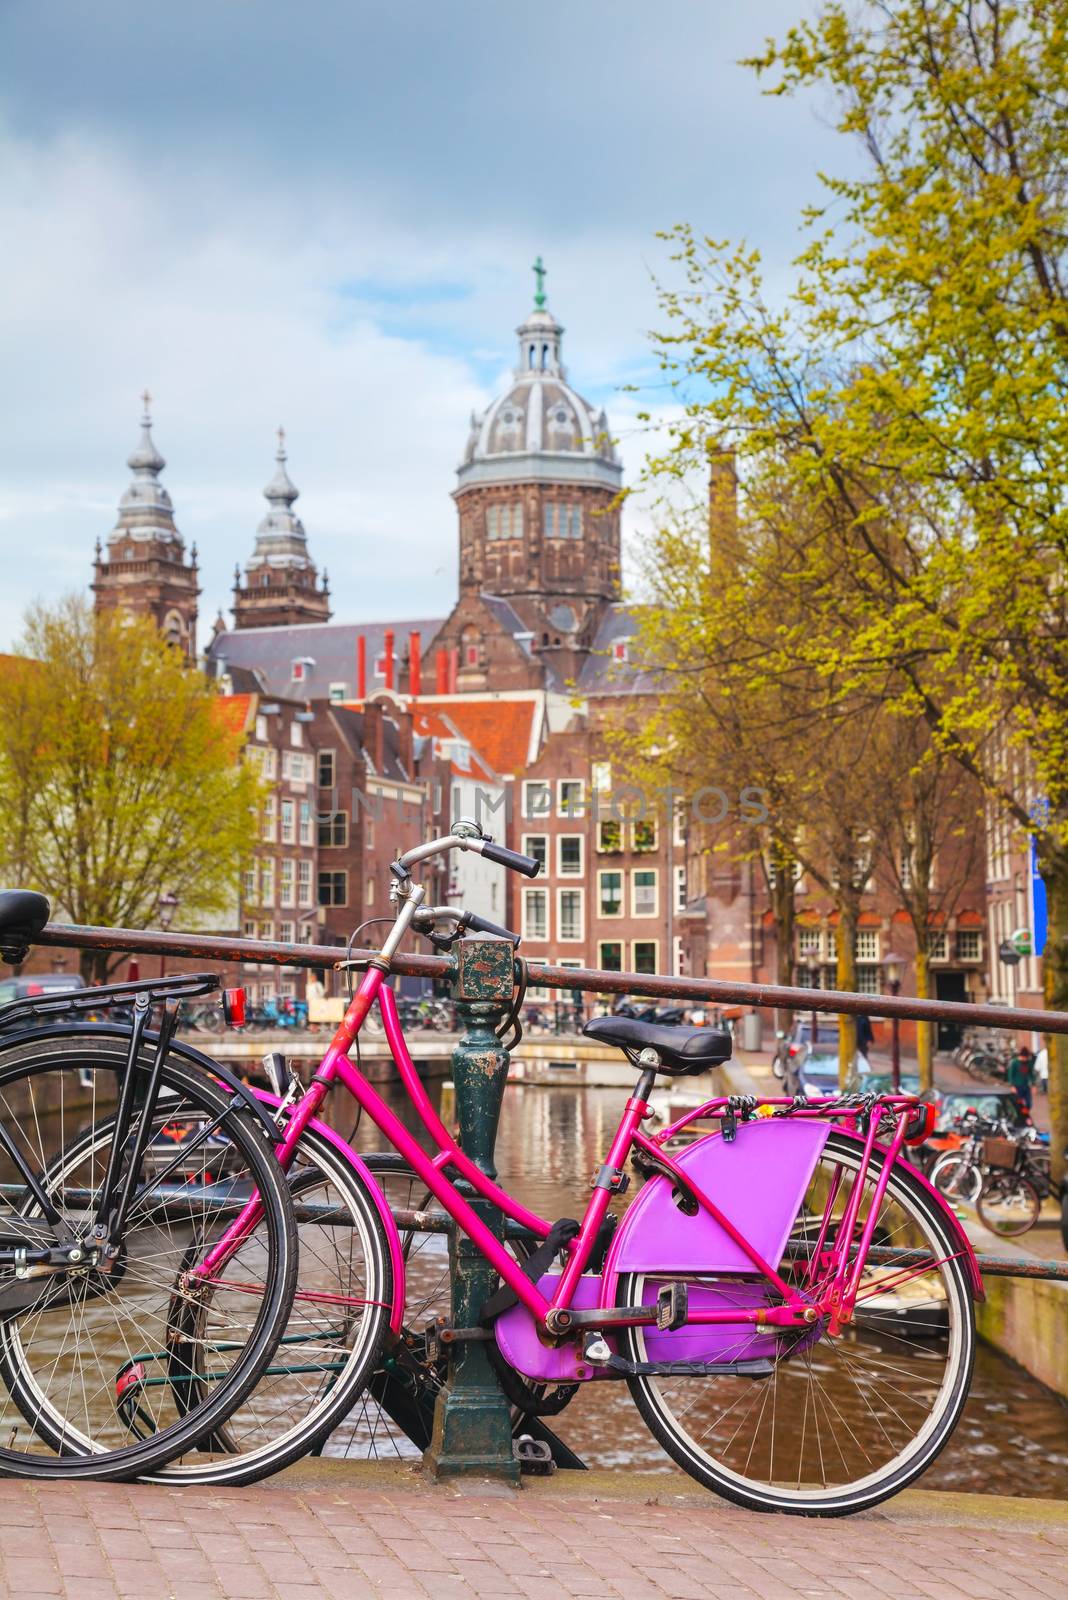 AMSTERDAM - APRIL 16: Bicycles parked at the bridge on April 16, 2015 in Amsterdam, Netherlands. It's the capital city and most populous city of the Kingdom of the Netherlands.